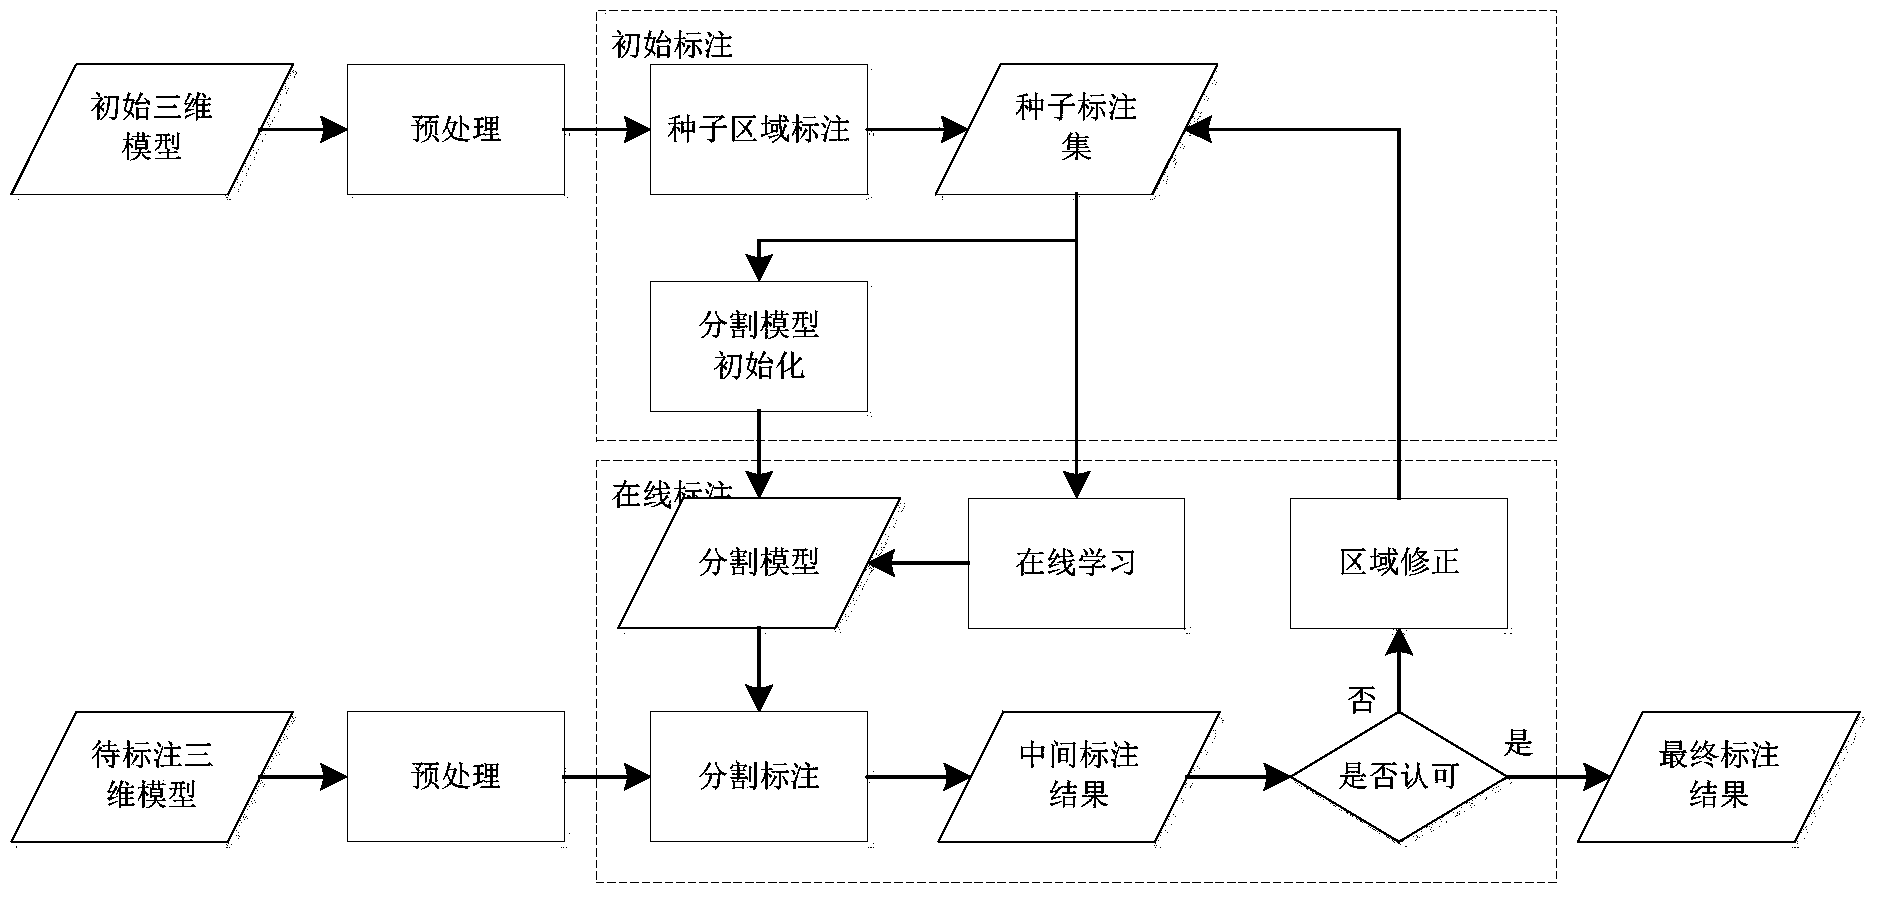 Online marking method for three-dimensional model component